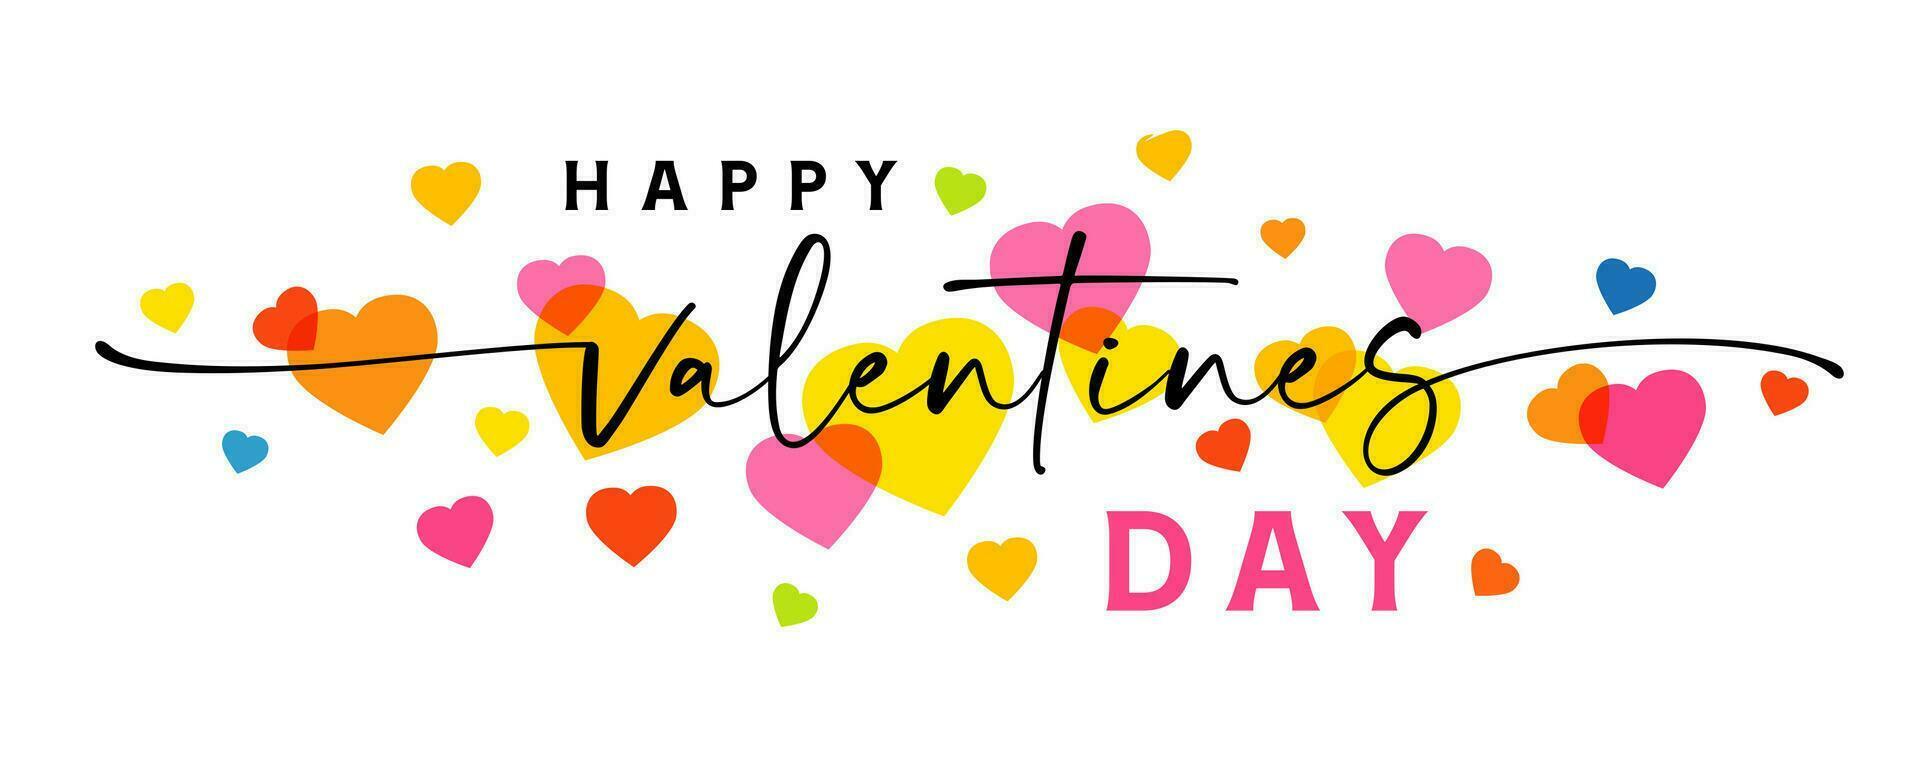 Happy Valentine's Day horizontal banner. Colorful design vector